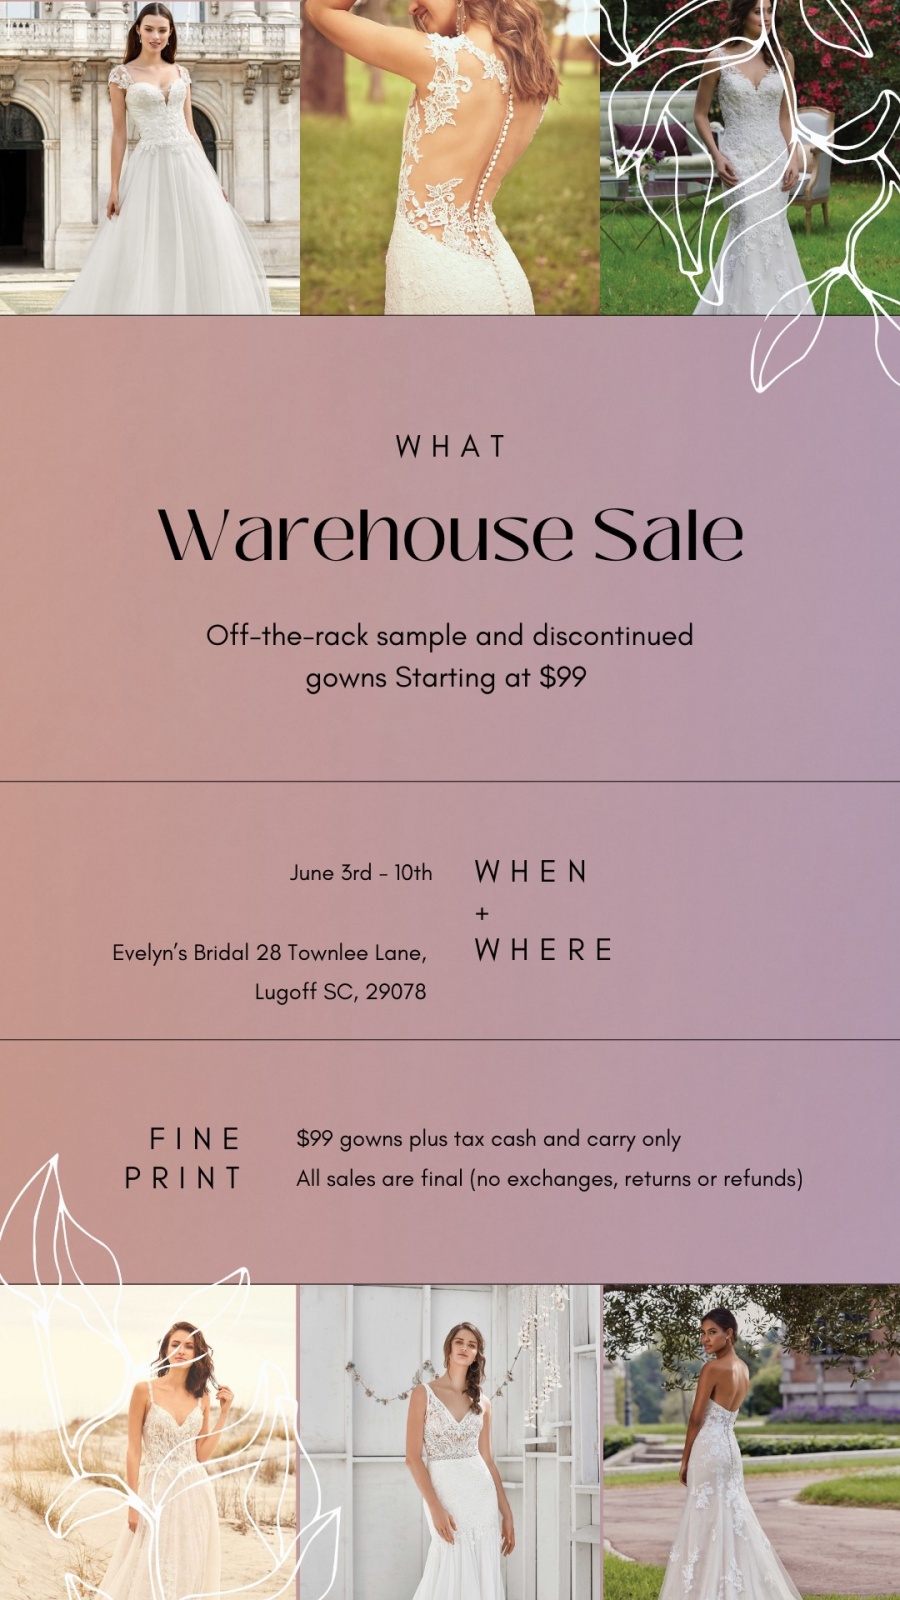 Evelyn's Bridal Warehouse Sale